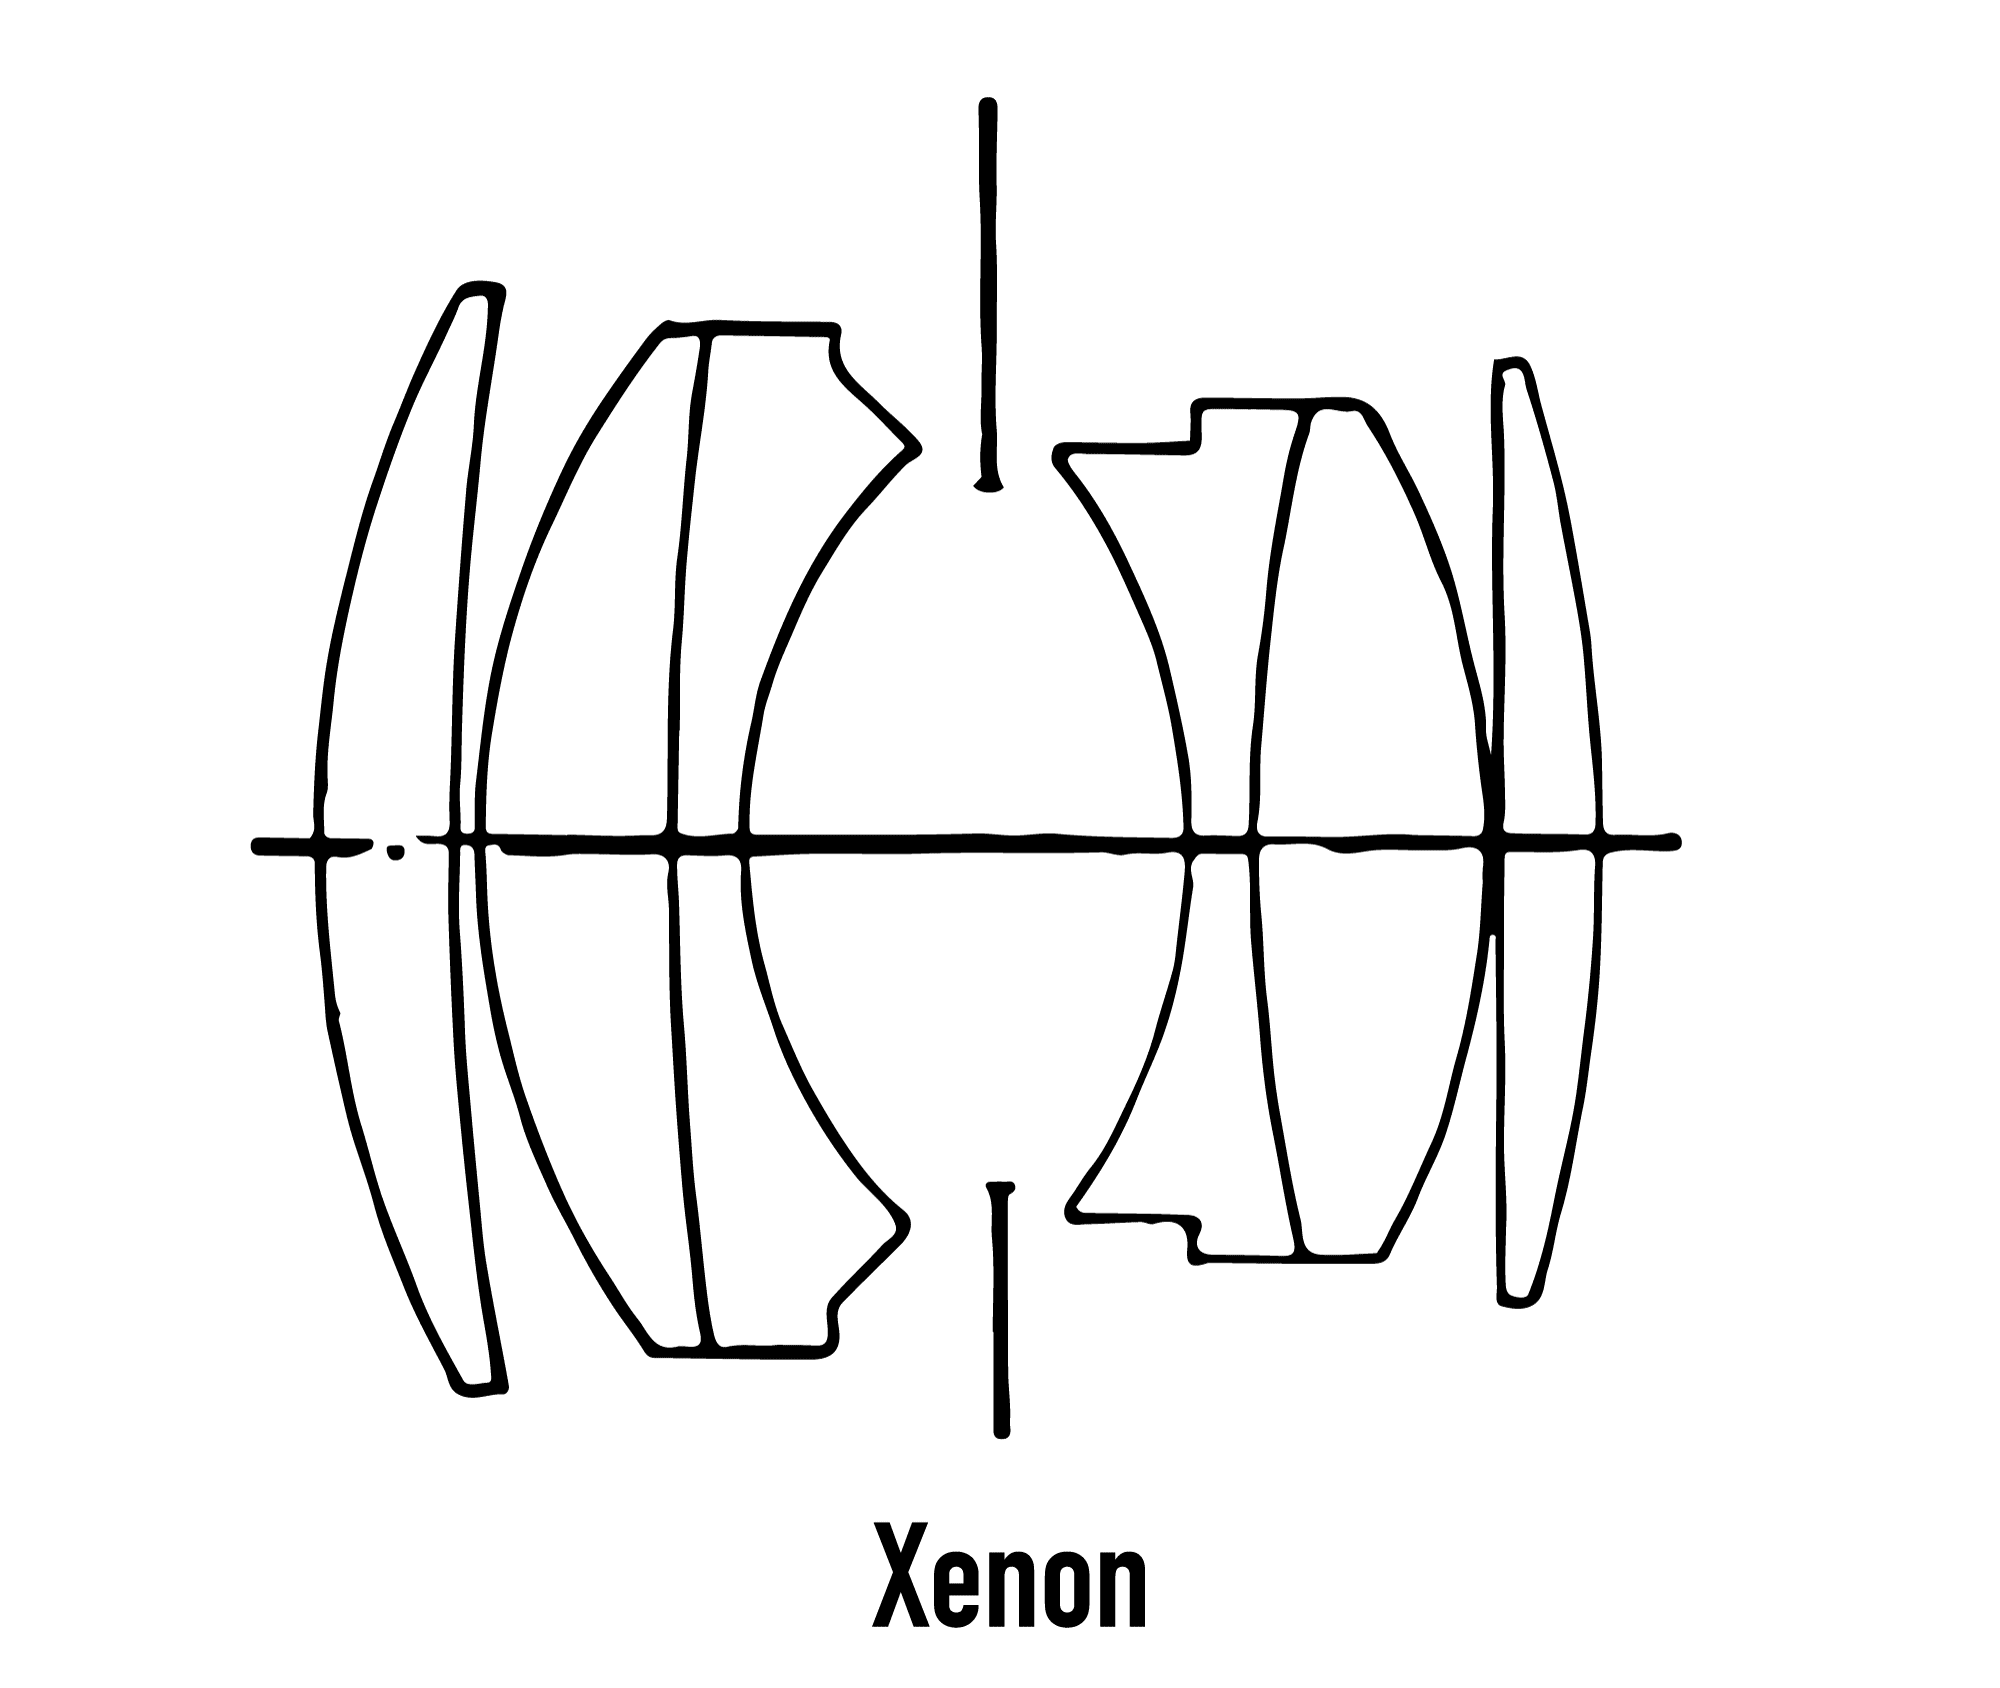 Enlarged Xenon lens diagram showing 6 elements in 4 groups construction